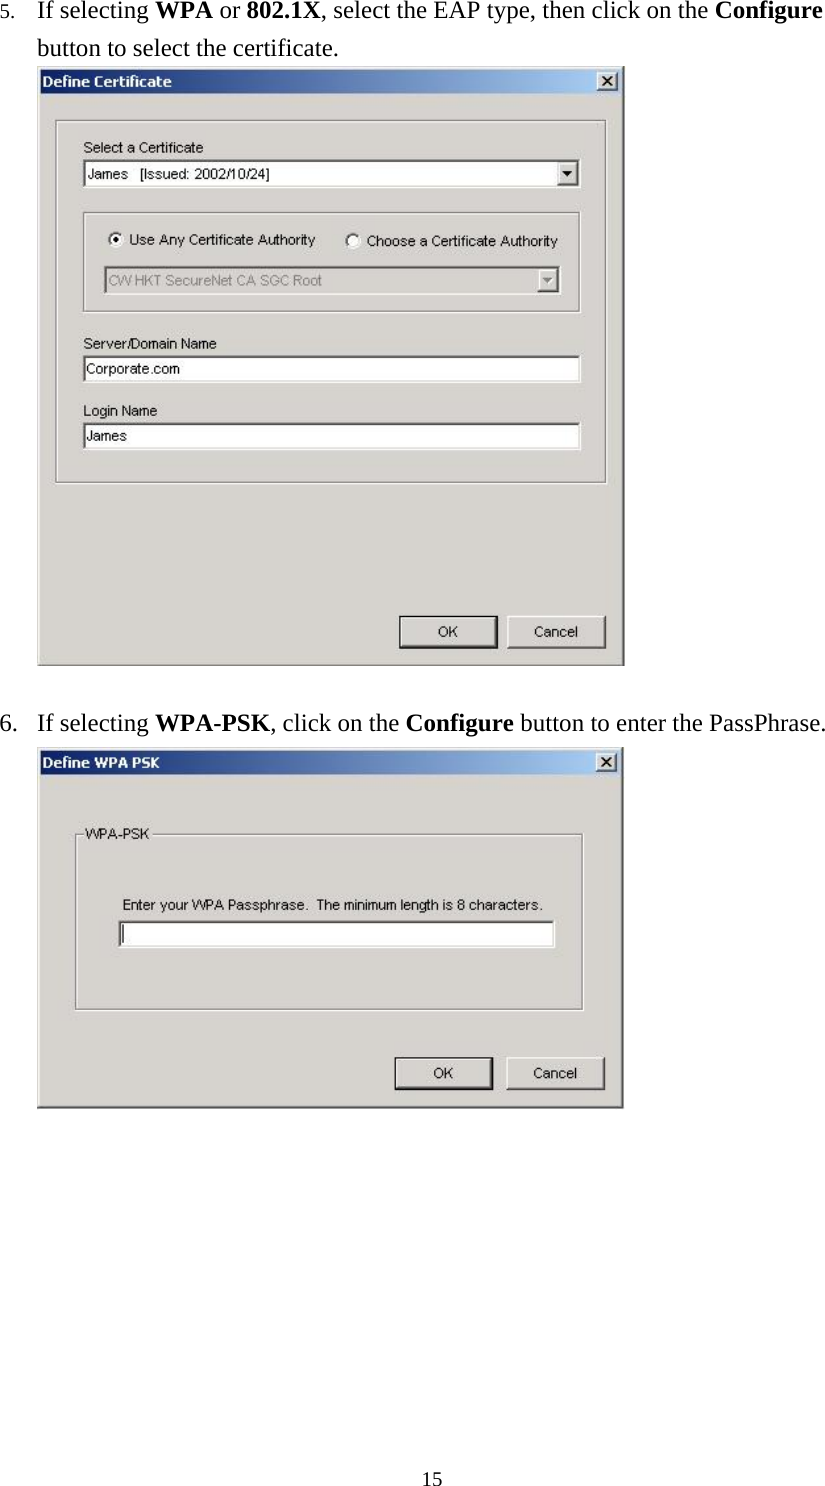  155. If selecting WPA or 802.1X, select the EAP type, then click on the Configure button to select the certificate.   6. If selecting WPA-PSK, click on the Configure button to enter the PassPhrase.   